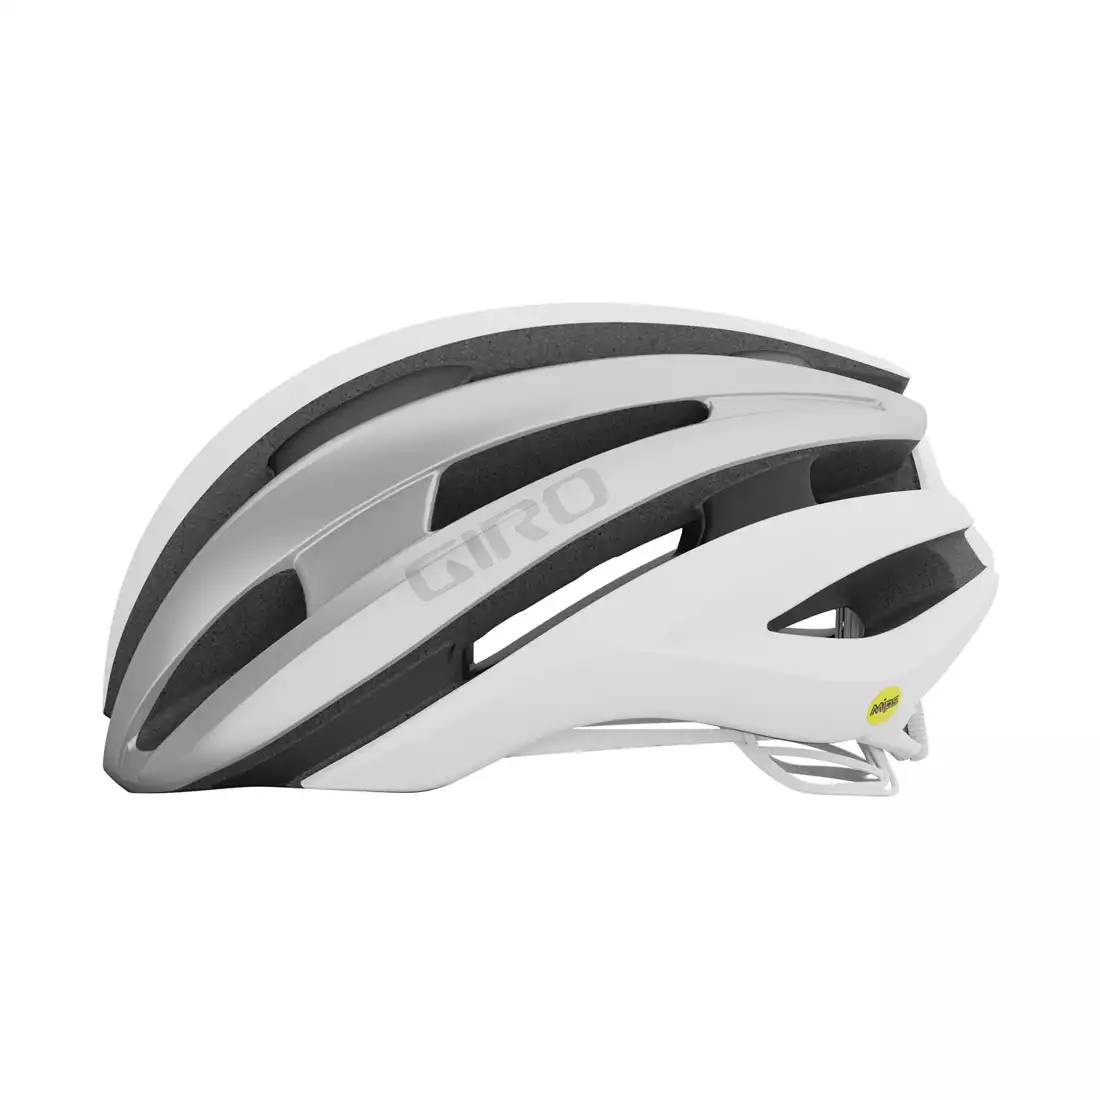 Kask szosowy GIRO SYNTHE INTEGRATED MIPS II matte white silver roz. S (51-55 cm) (NEW)GR-7130743